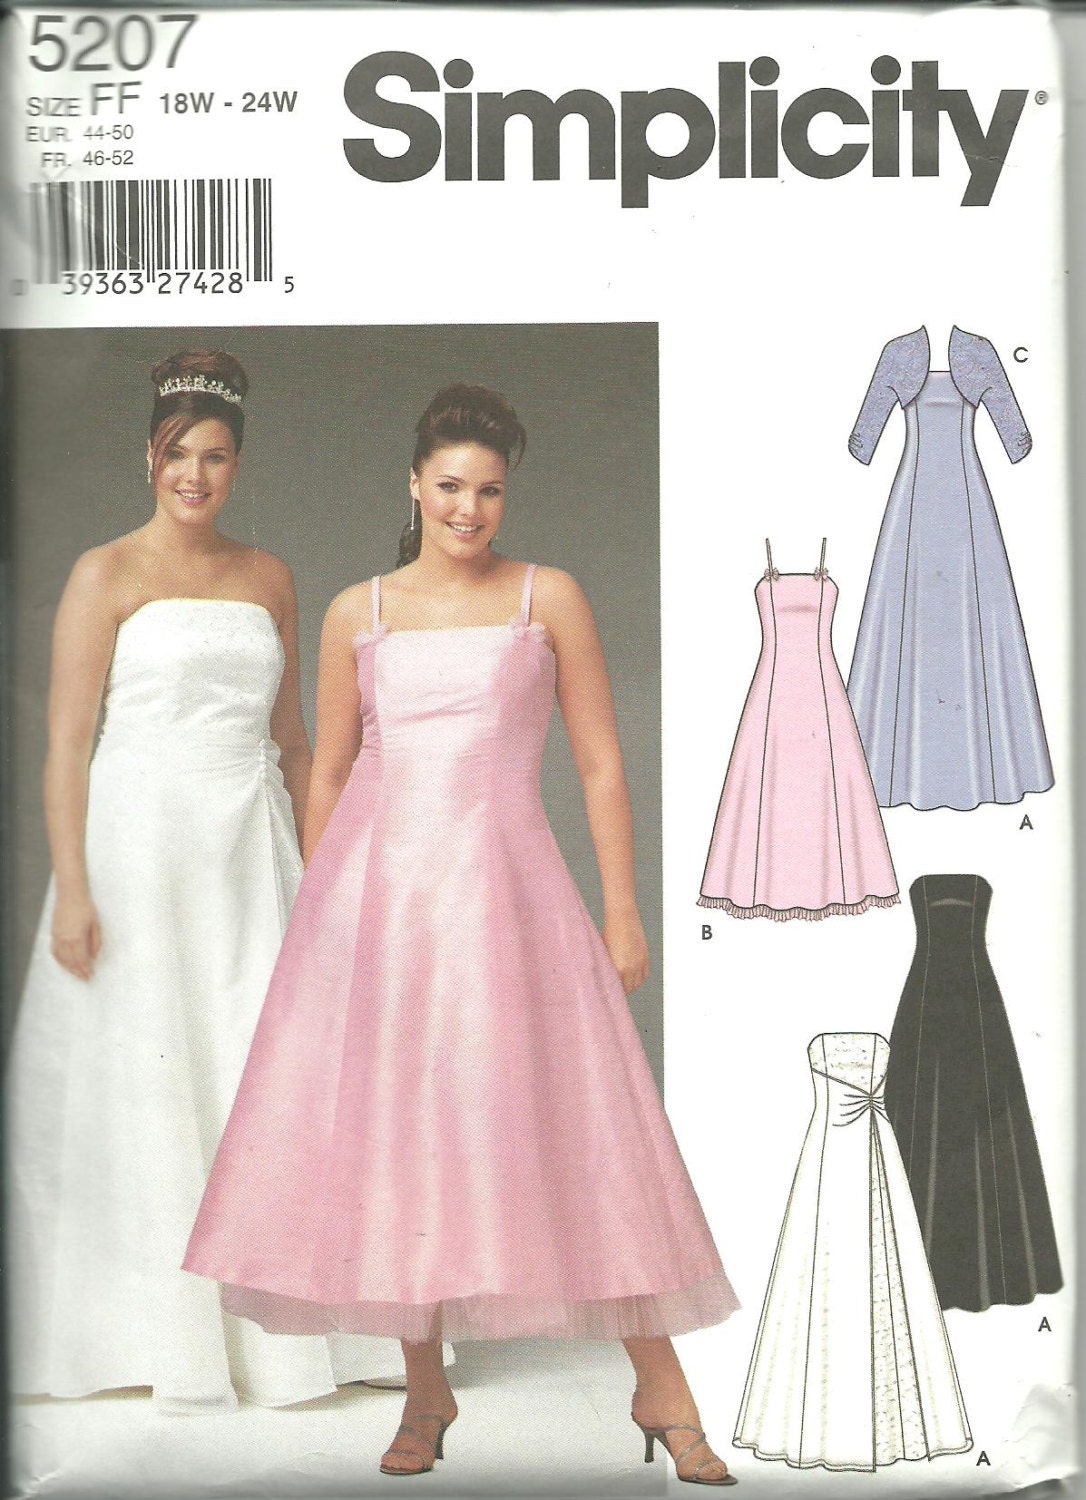  Simplicity Wedding Dress Patterns  Don t miss out 